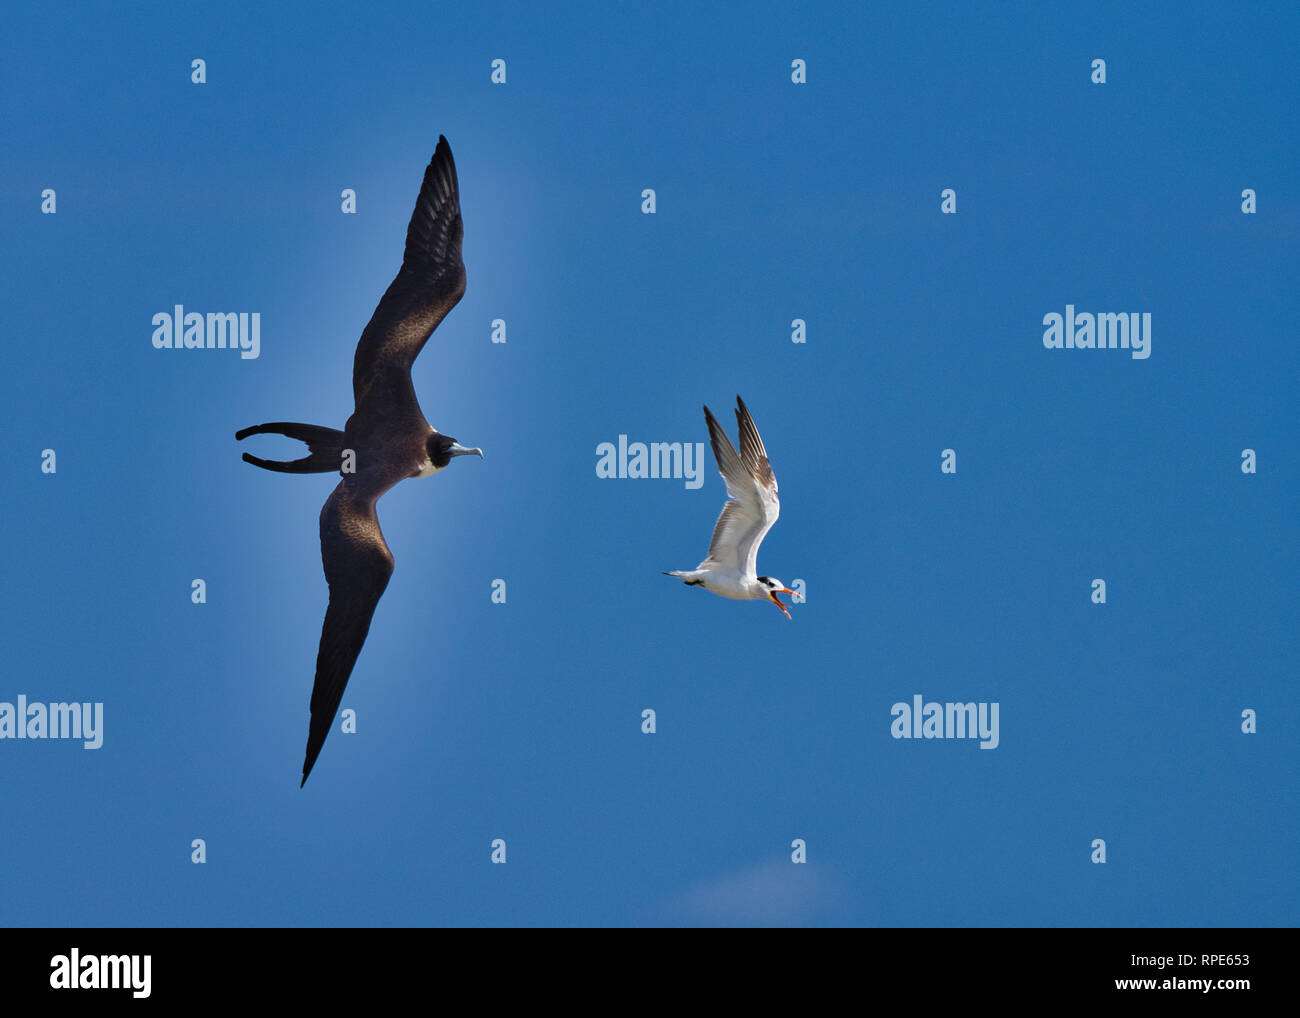 Magnificent Frigate bird chasing a tern blue sky background Stock Photo